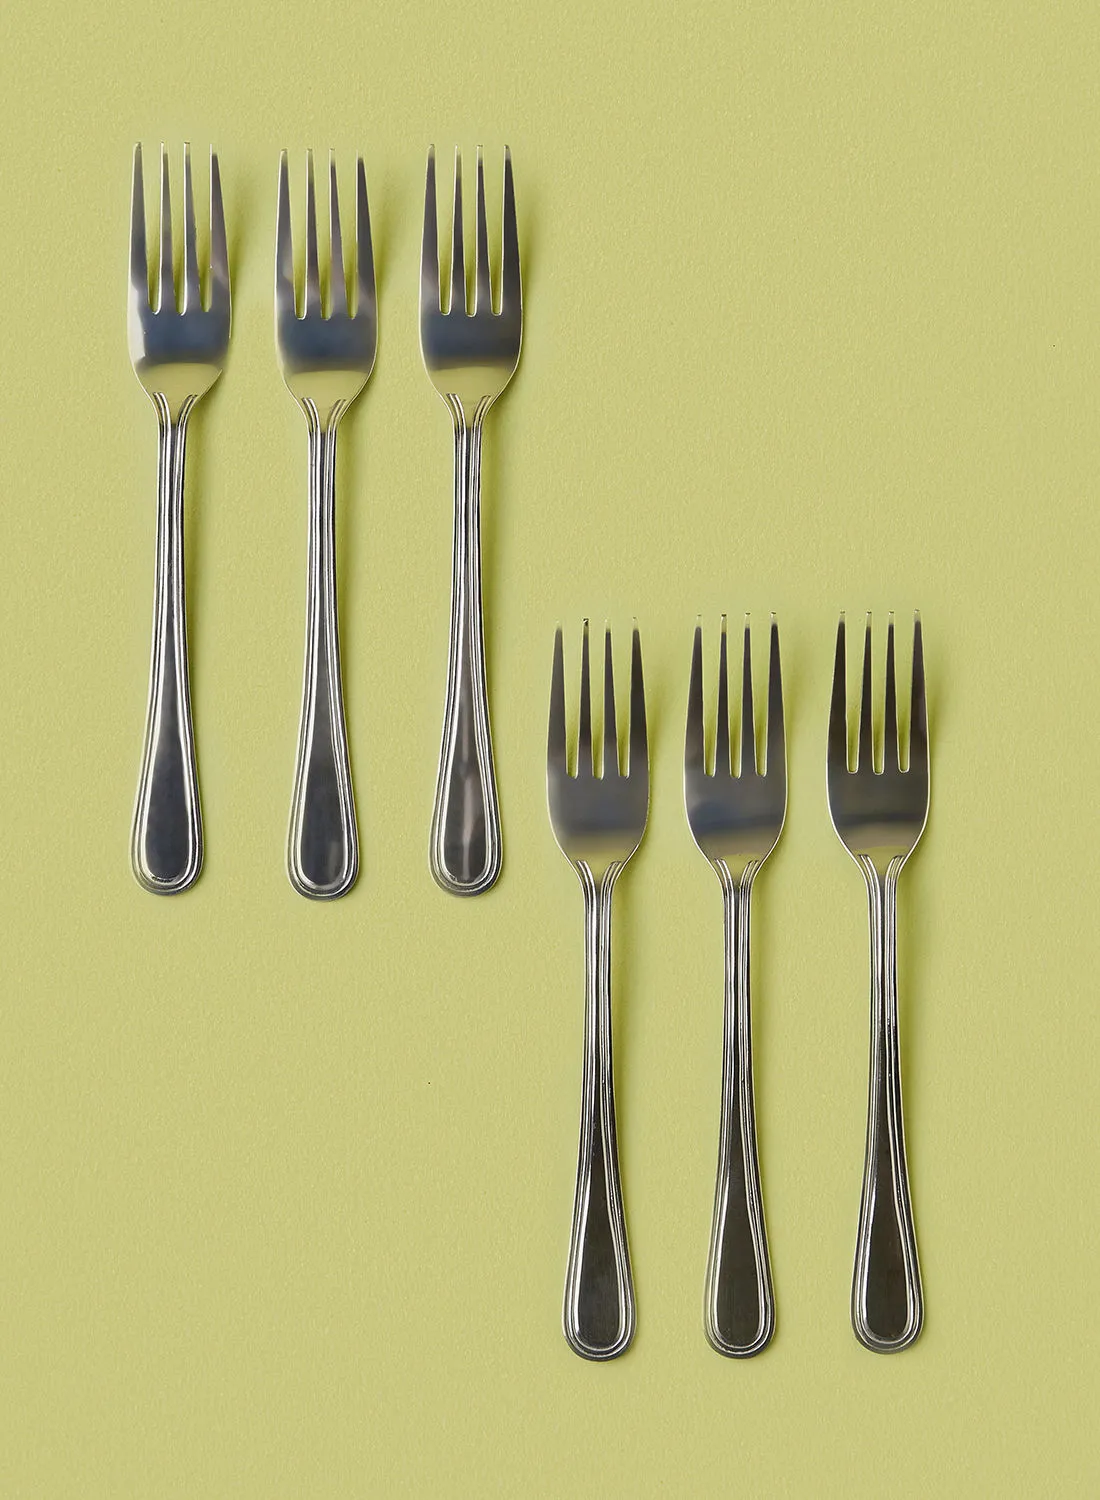 noon east 6 Piece Forks Set - Made Of Stainless Steel - Silverware Flatware - Fork Set - Serves 6 - Design Silver Scorpious